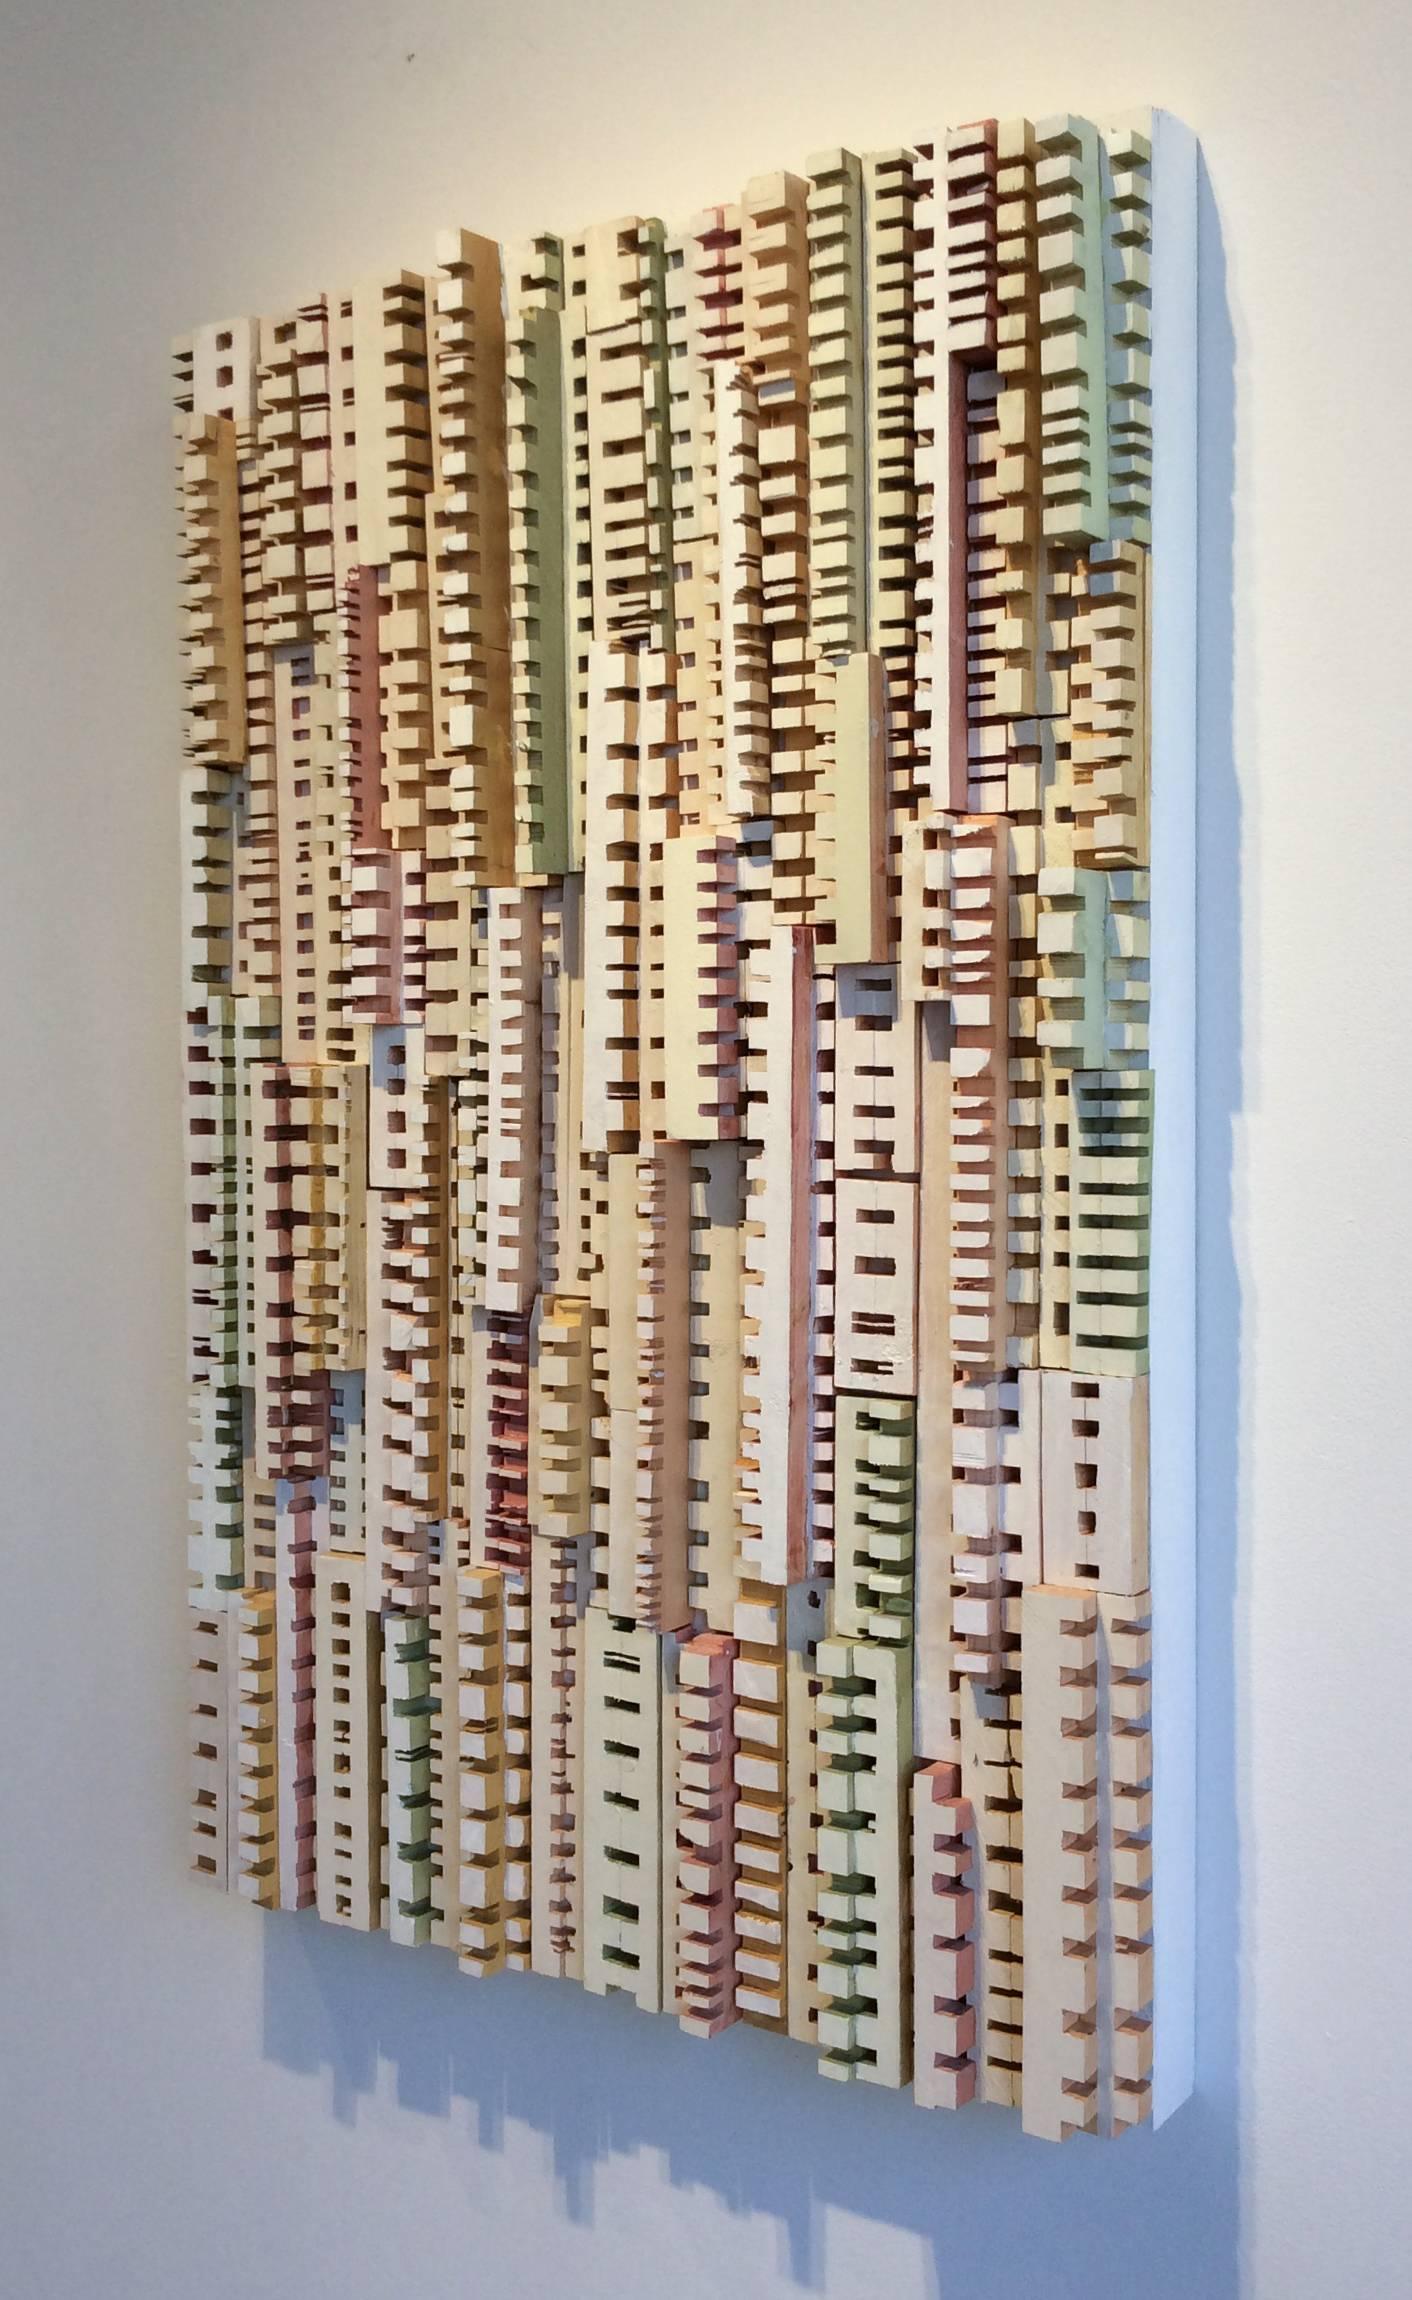 30 x 20 x 2 inches
Wood strips carefully carved and hand painted in acrylic with white, green, orange, yellow and maroon hues, adhered to a wood panel that measures 30 x 20 inches.

This modern, abstract three-dimensional wall sculpture was made by